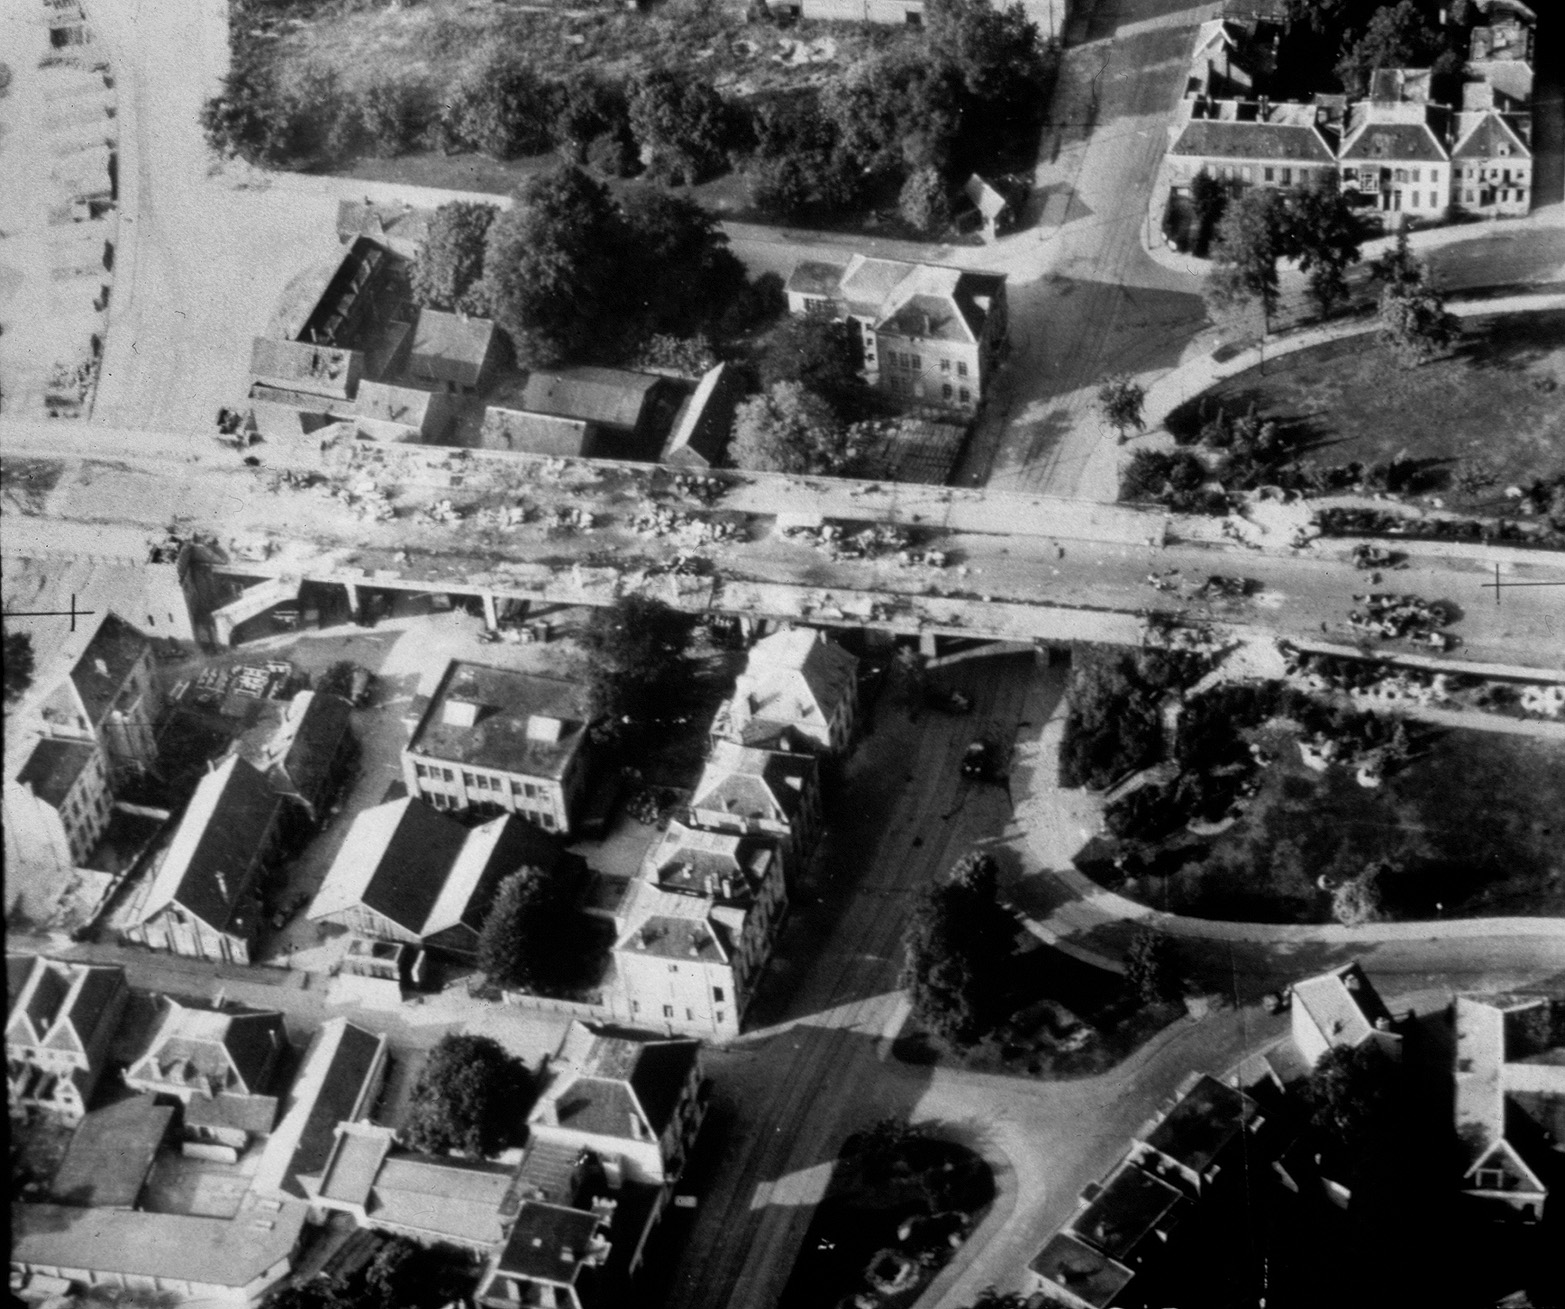 An RAF reconnaissance photo shows the damage British paratroopers inflicted to a German motorized column in a firefight on the north end of the Arnhem Highway Bridge on the second day of the operation.